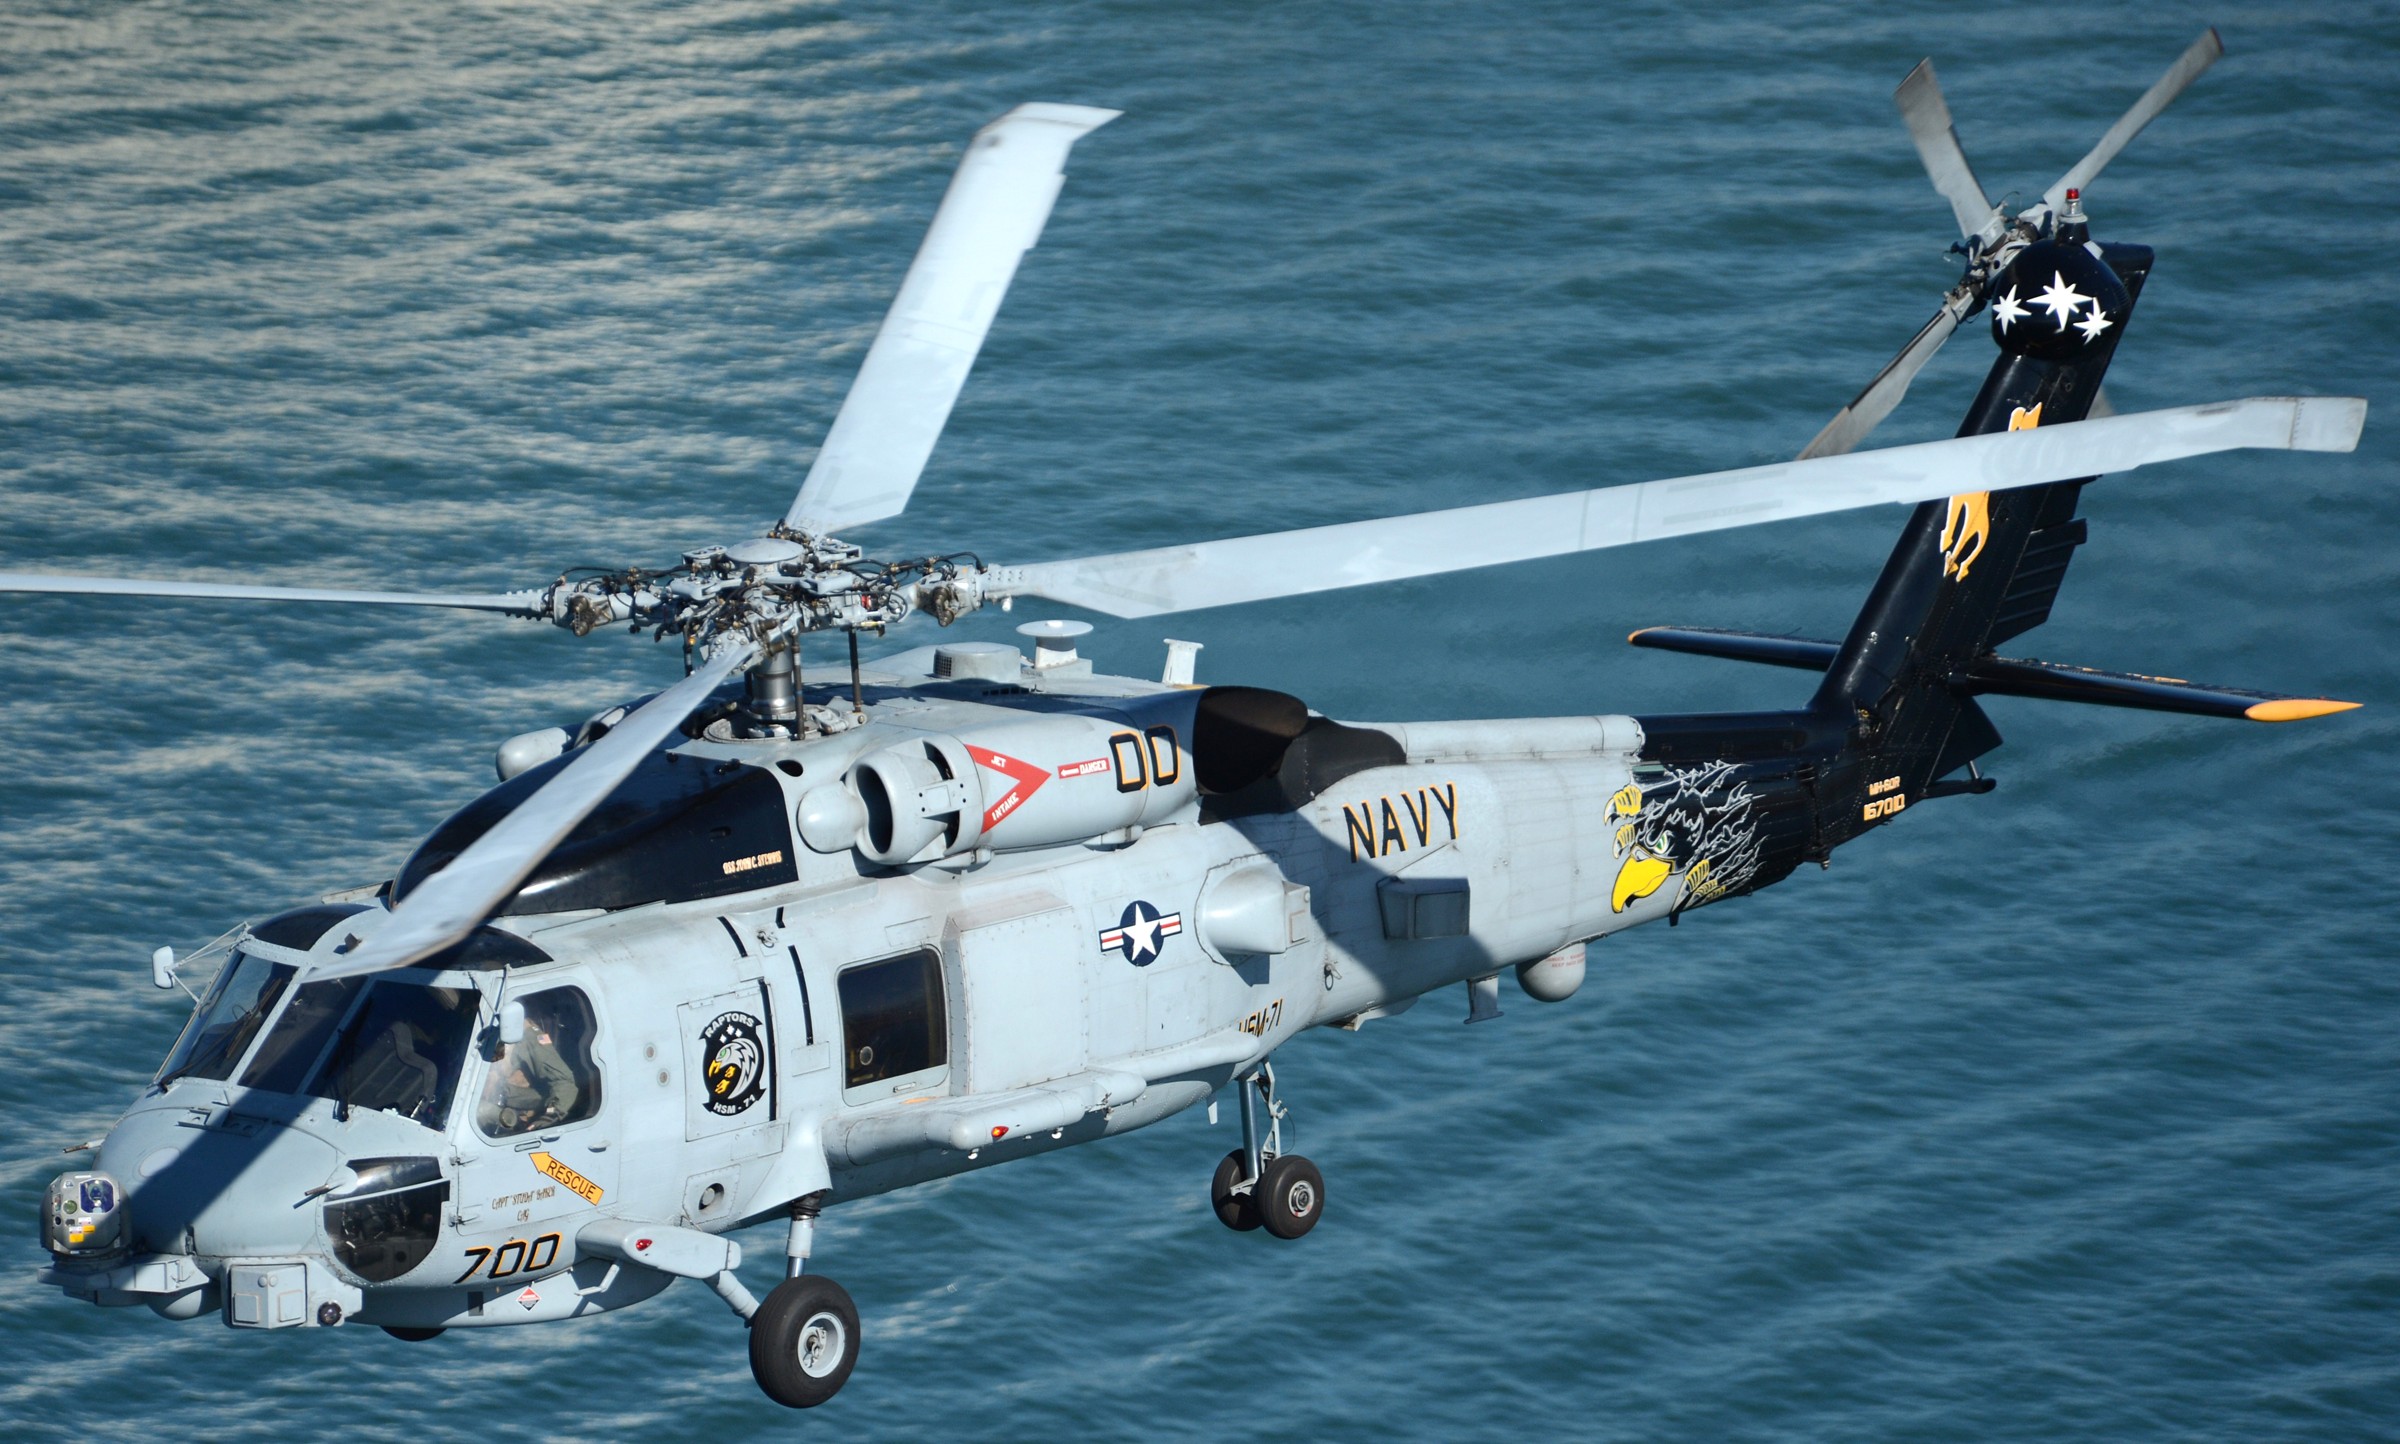 hsm-71 raptors helicopter maritime strike squadron mh-60r seahawk navy 2014 52 special painting scheme